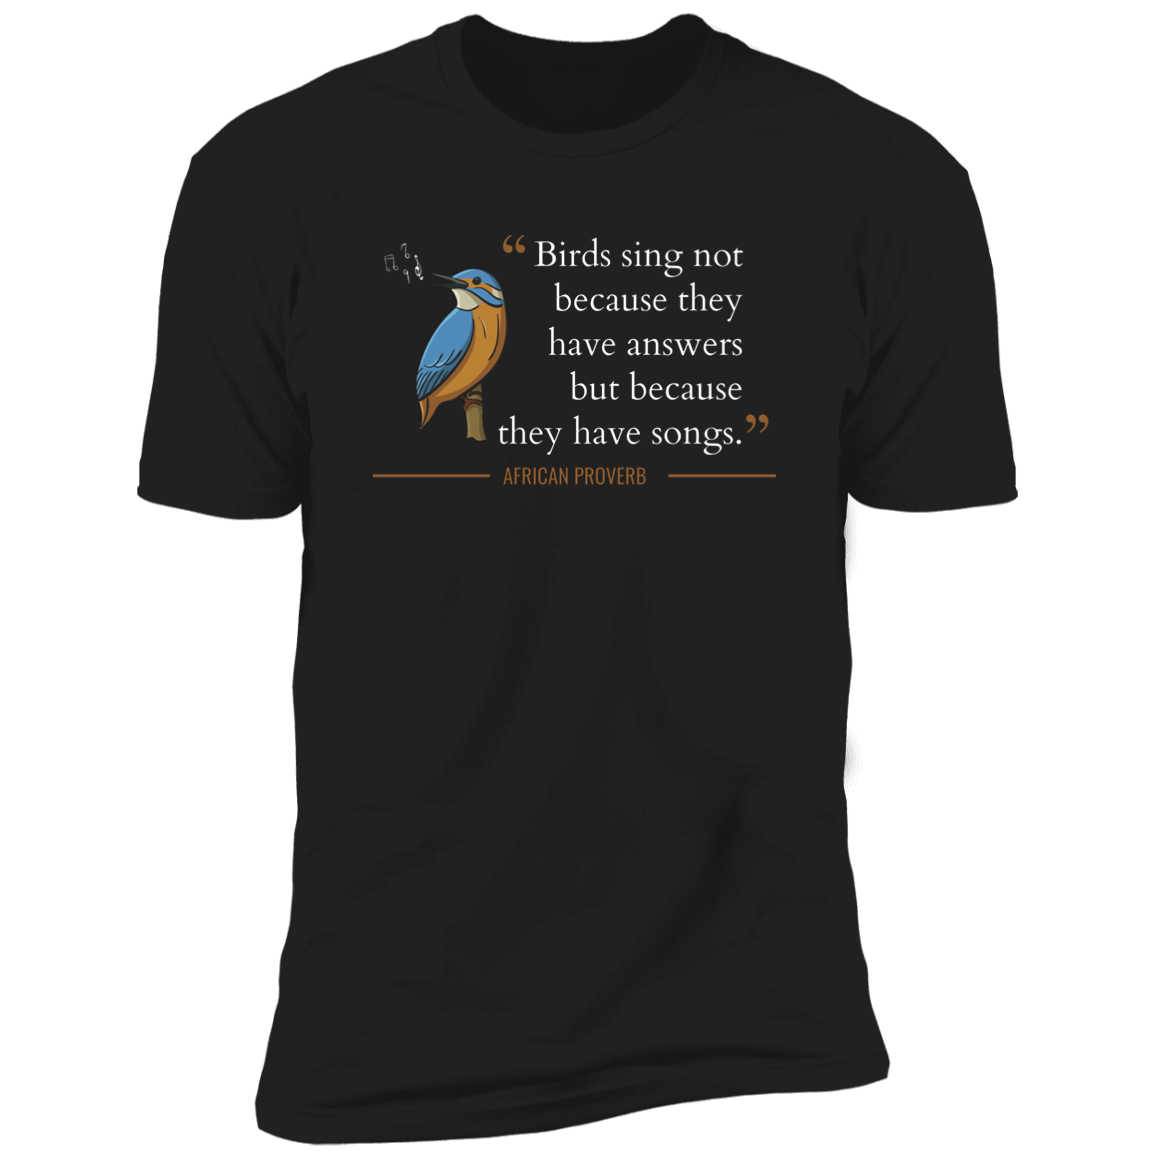 Birds Sing Not Because They Have Answers Classic T-Shirt (Unisex)